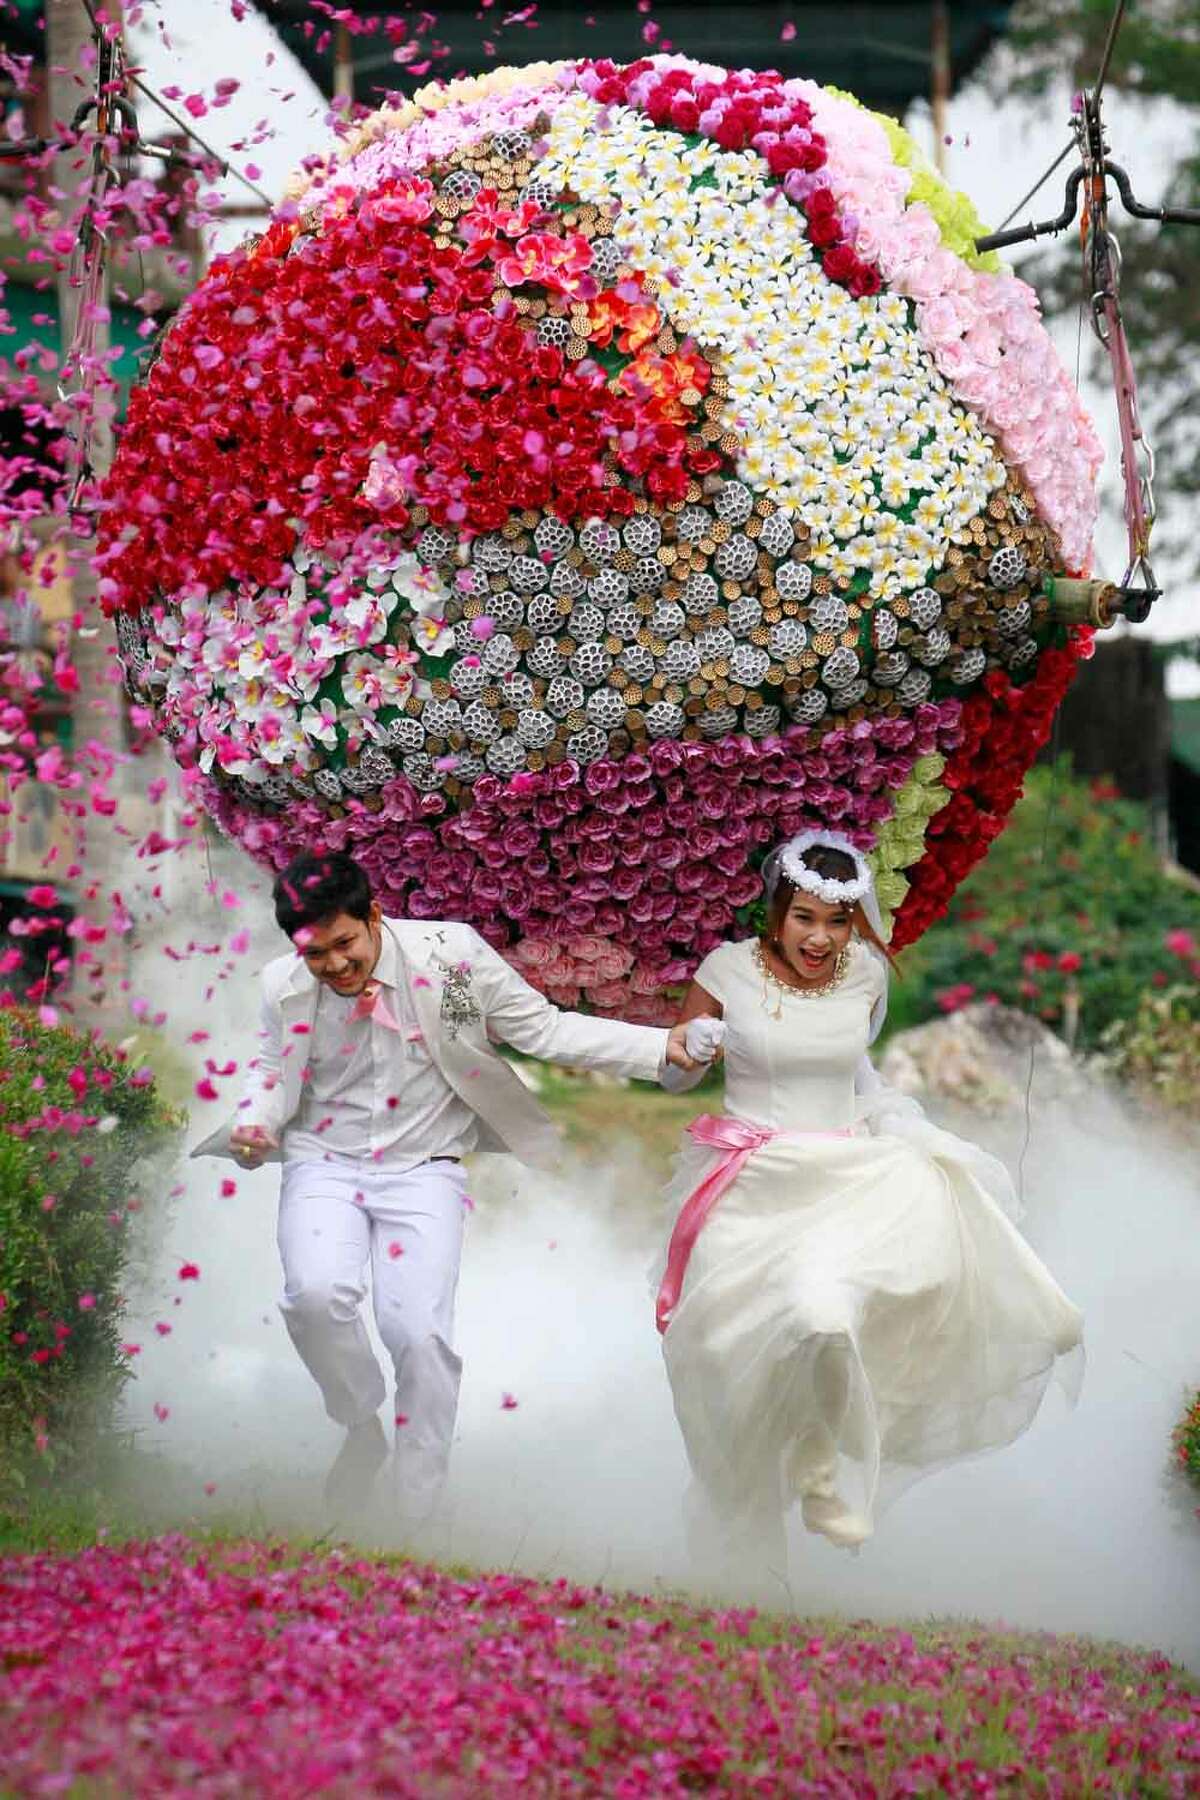 Prasit Rangsitwong, left, and Varutton Rangsitwong run away from a giant flower ball as a part of an adventure-themed wedding ceremony in Prachinburi province, Thailand, Wednesday, Feb. 13, 2013, on the eve of Valentine's Day. (AP Photo/Wason Wanichakorn)